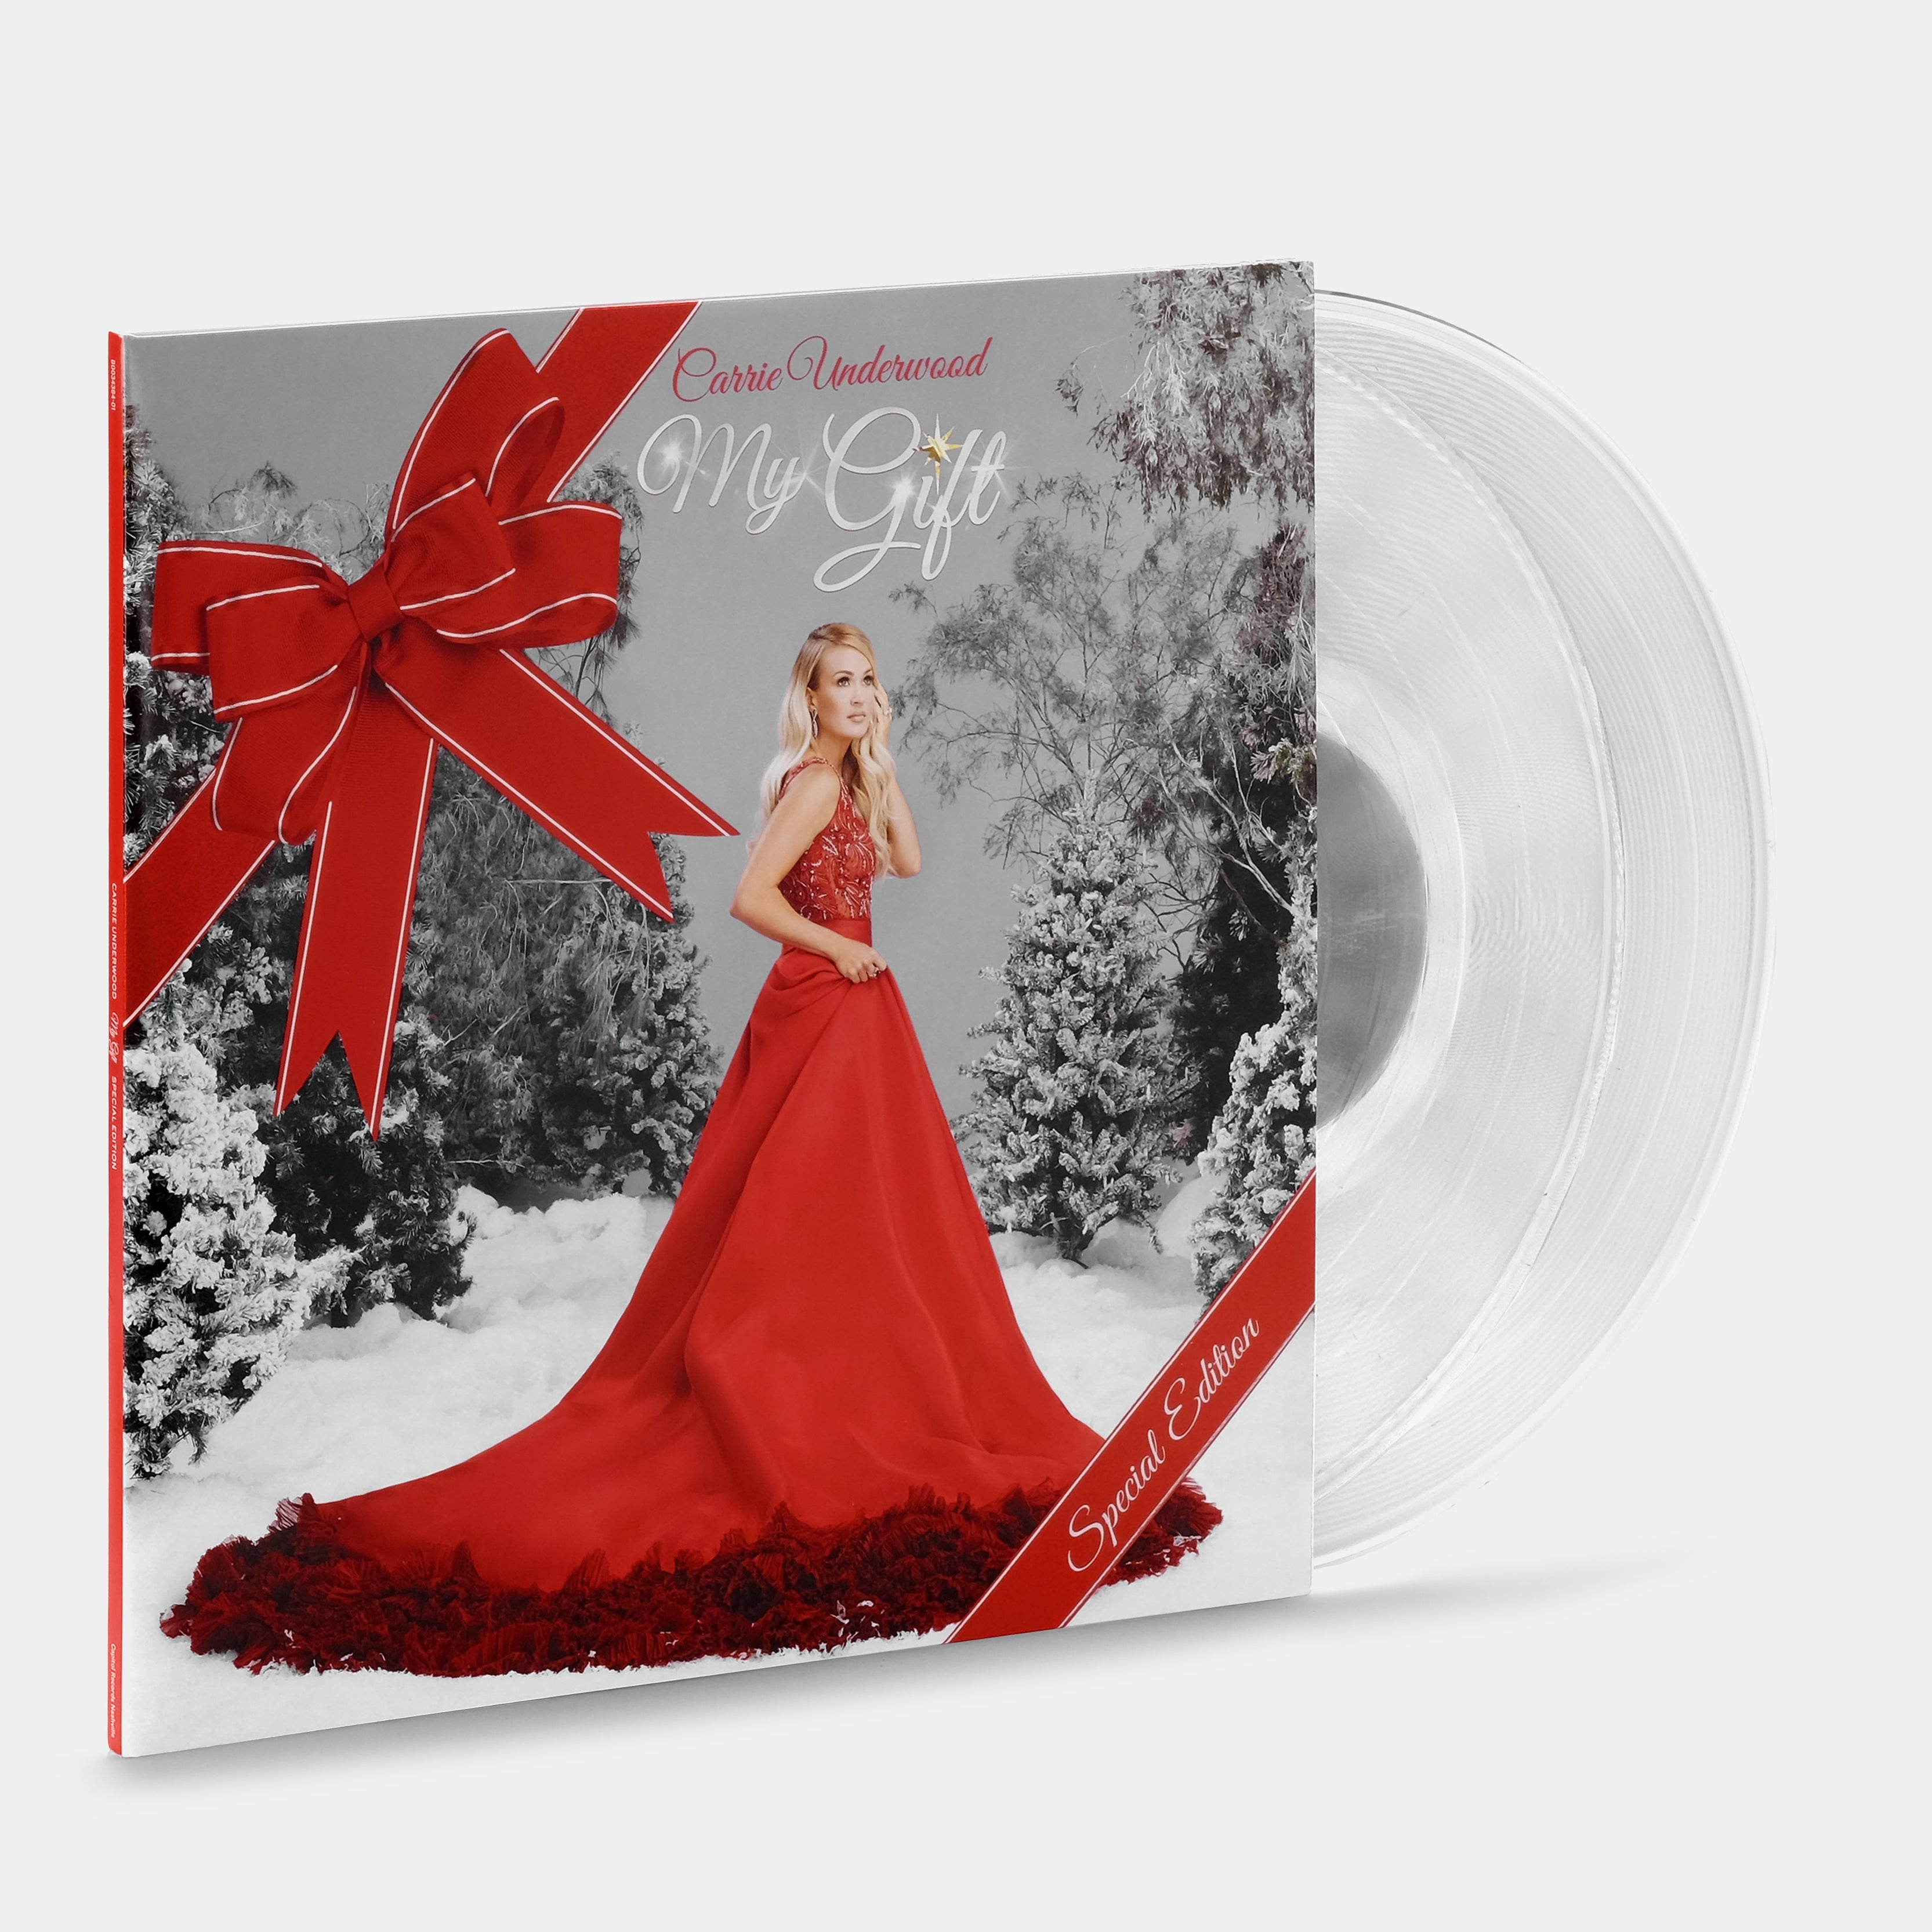 Carrie Underwood - My Gift 2xLP Crystal Clear Vinyl Record